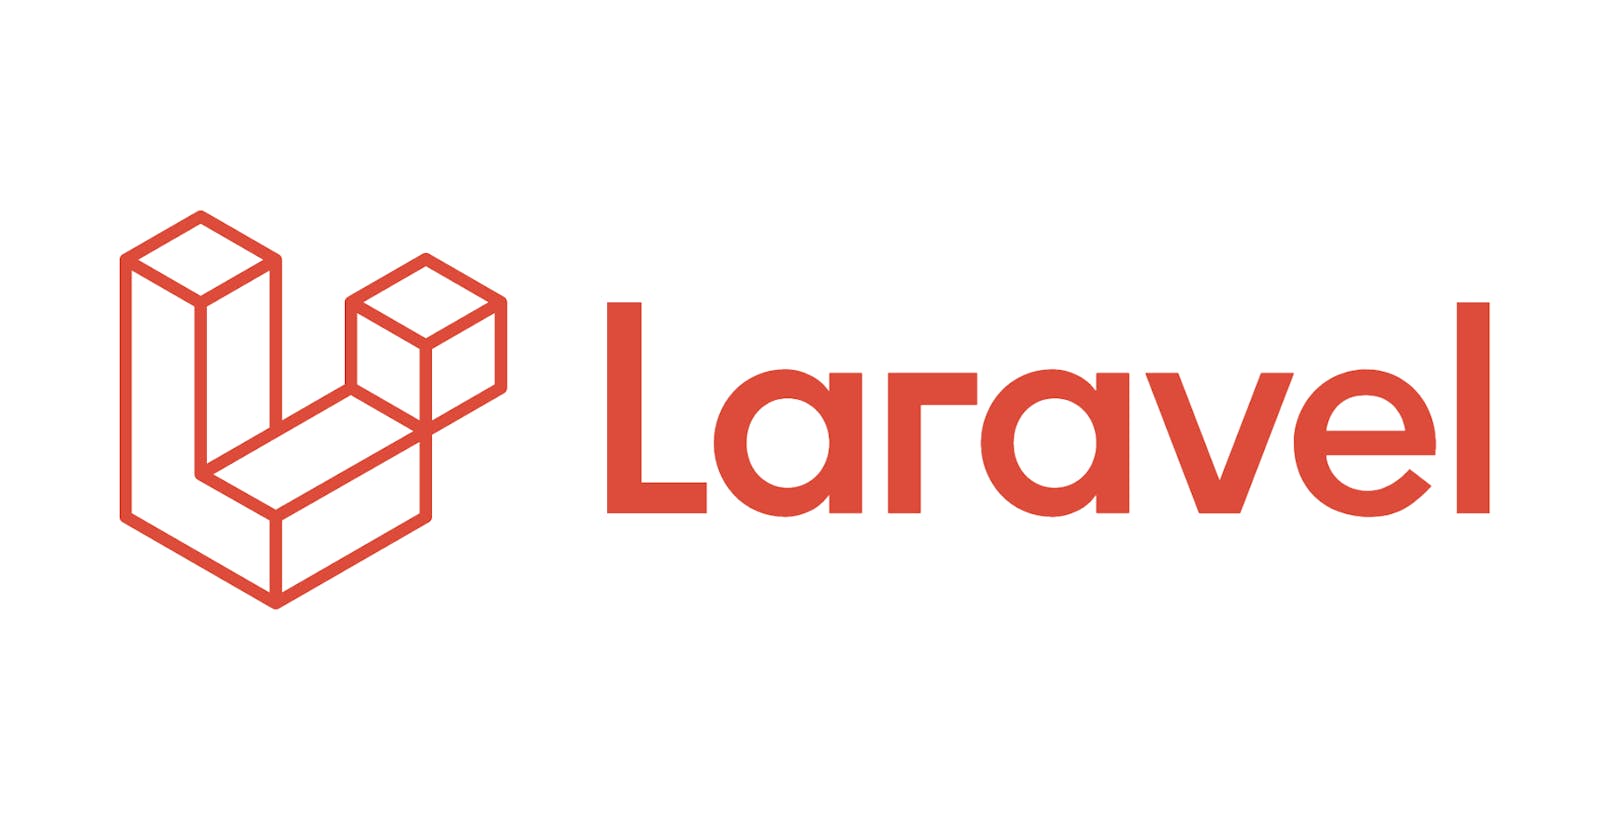 Deploying Your Laravel Application To Heroku In Six Simple Steps